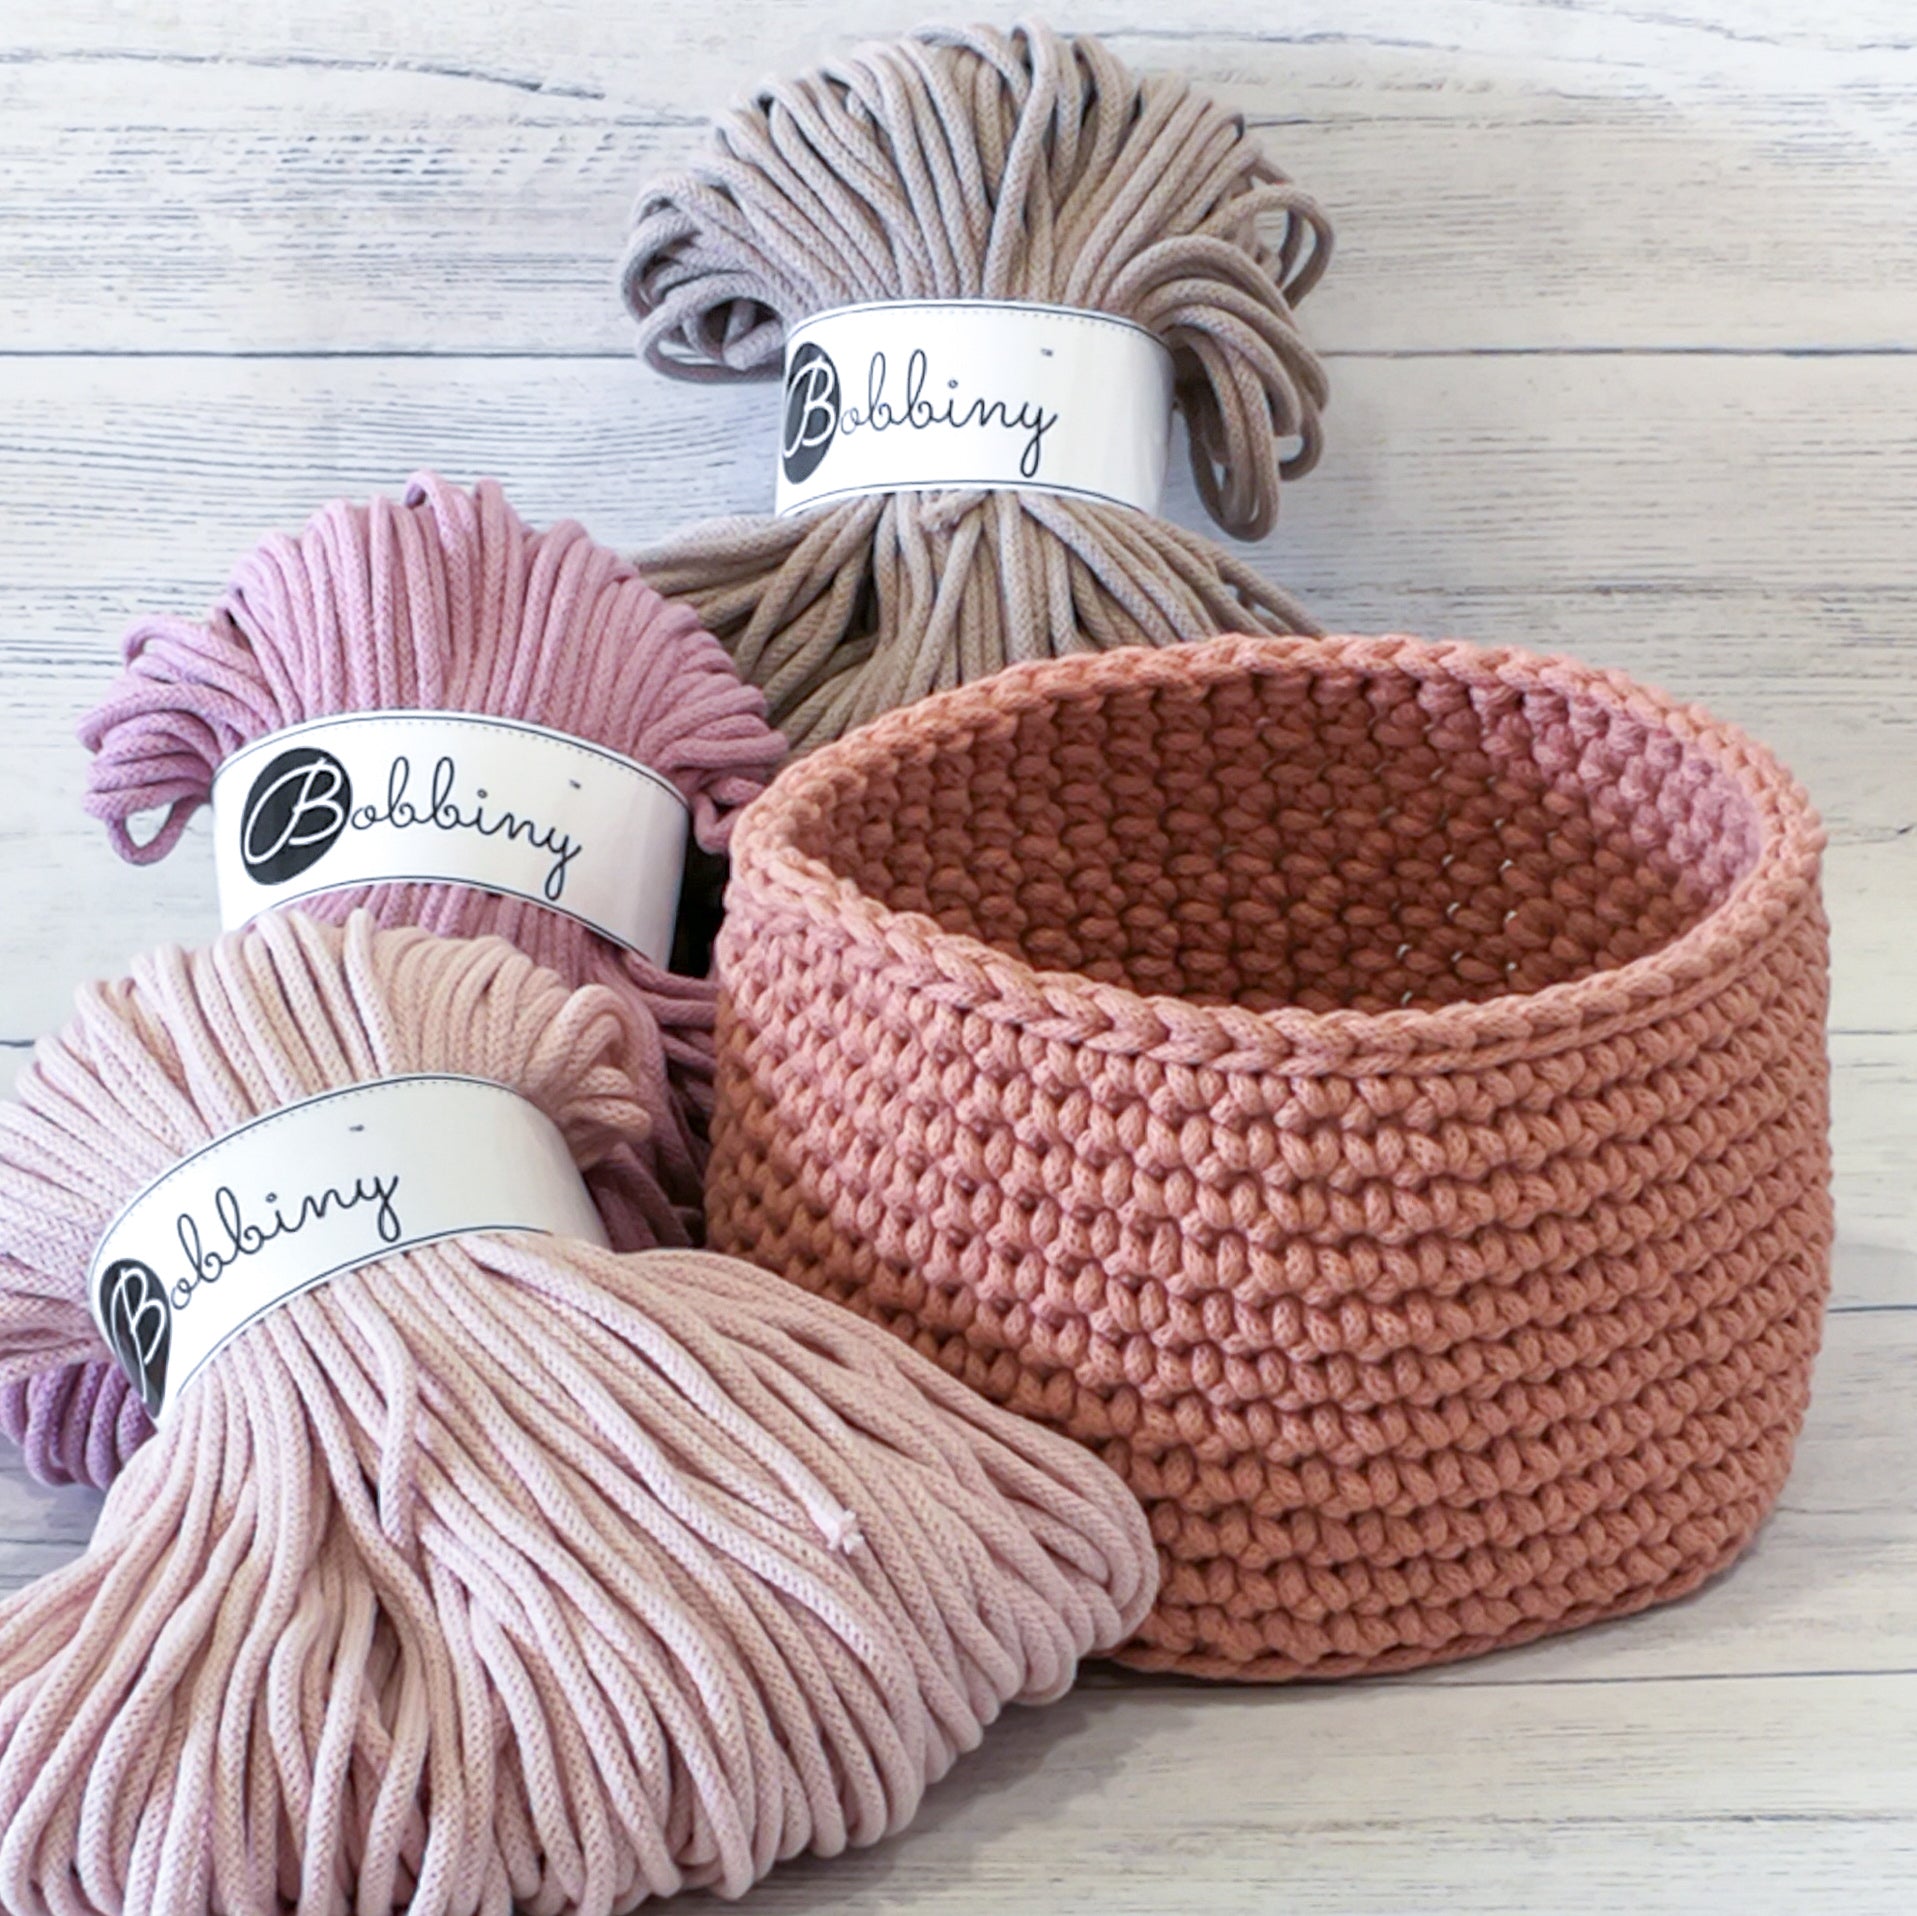 Learn To Crochet - Thingmy Basket